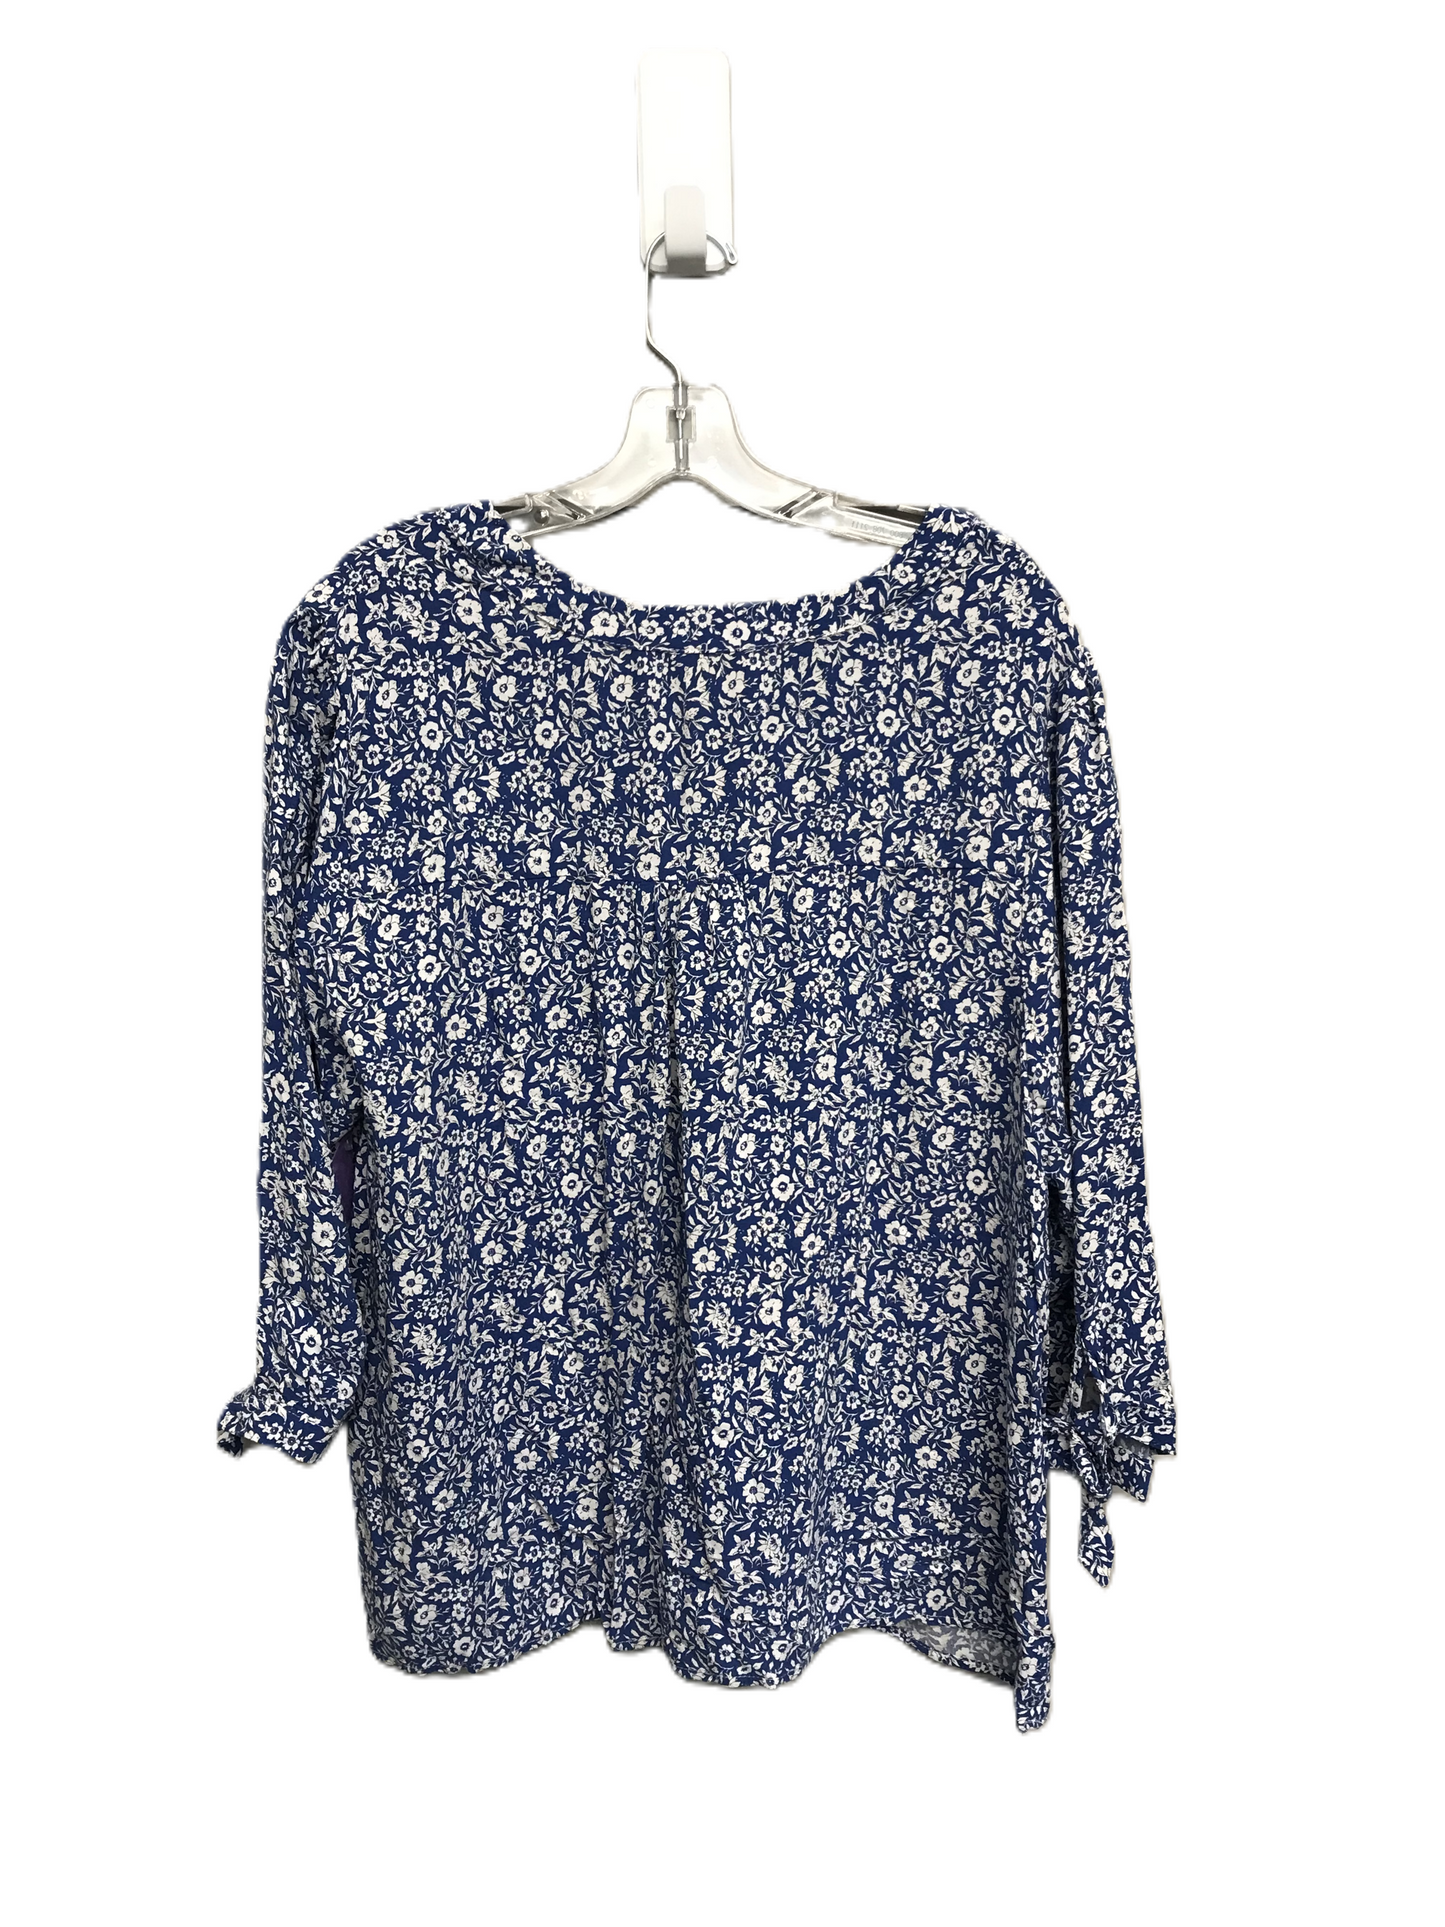 Floral Print Top Long Sleeve By Cynthia Rowley, Size: 1x